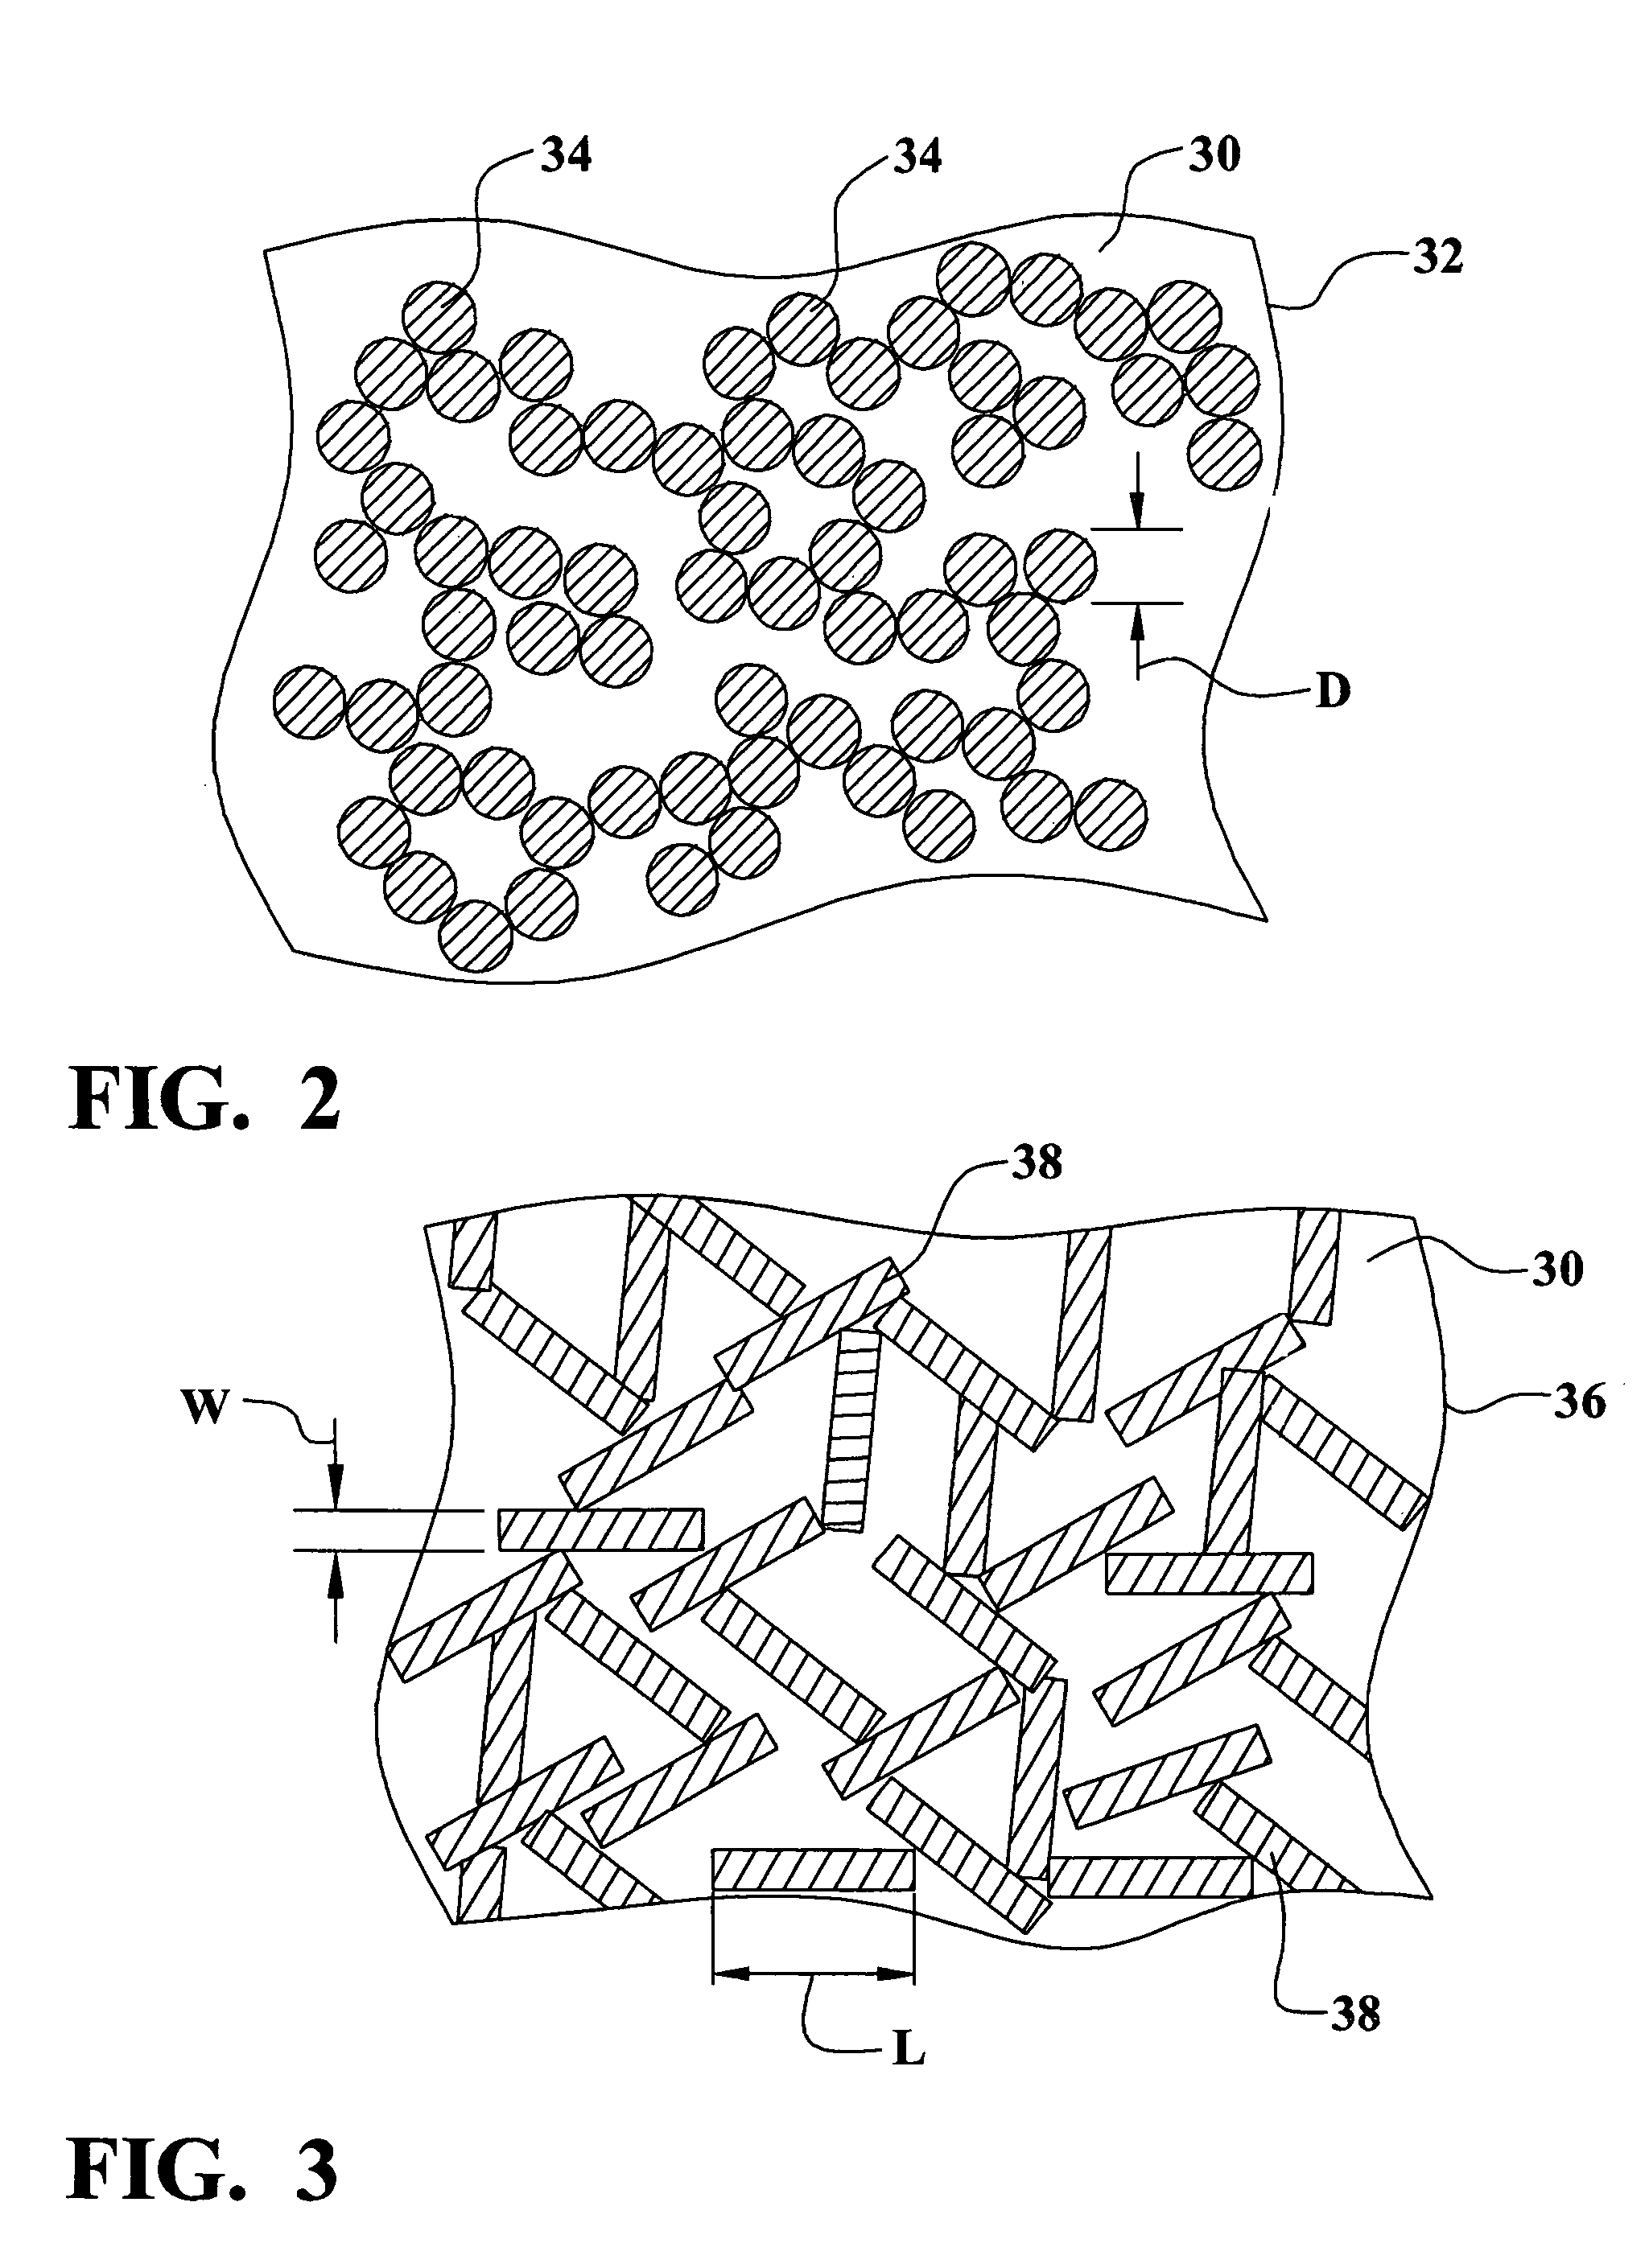 Methods of making electrical motor components from conductive loaded resin-based materials